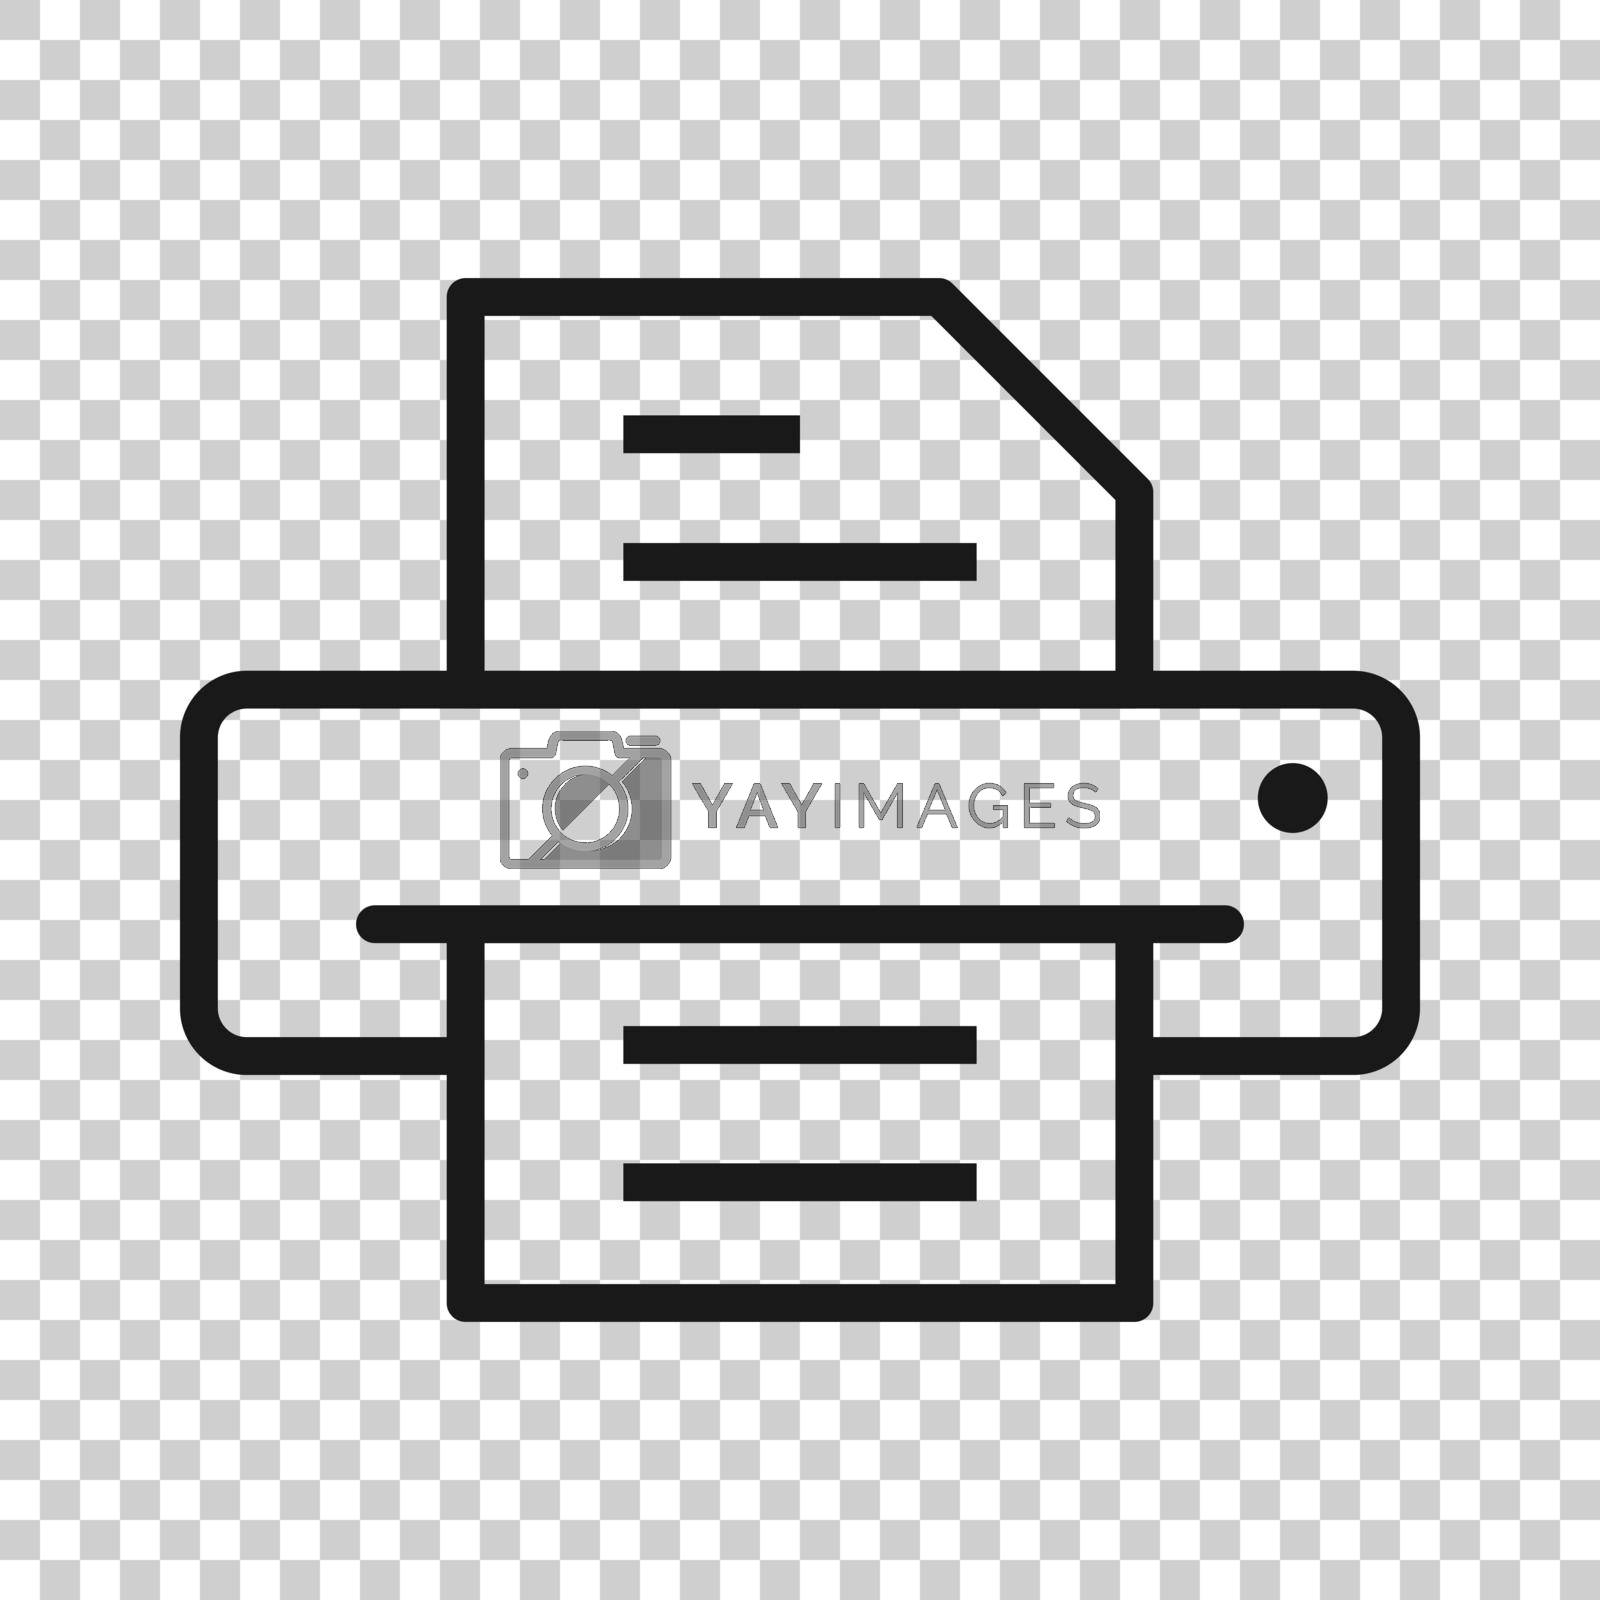 Royalty free image of Office printer icon in flat style. Fax vector illustration on white isolated background. Text printout business concept. by LysenkoA